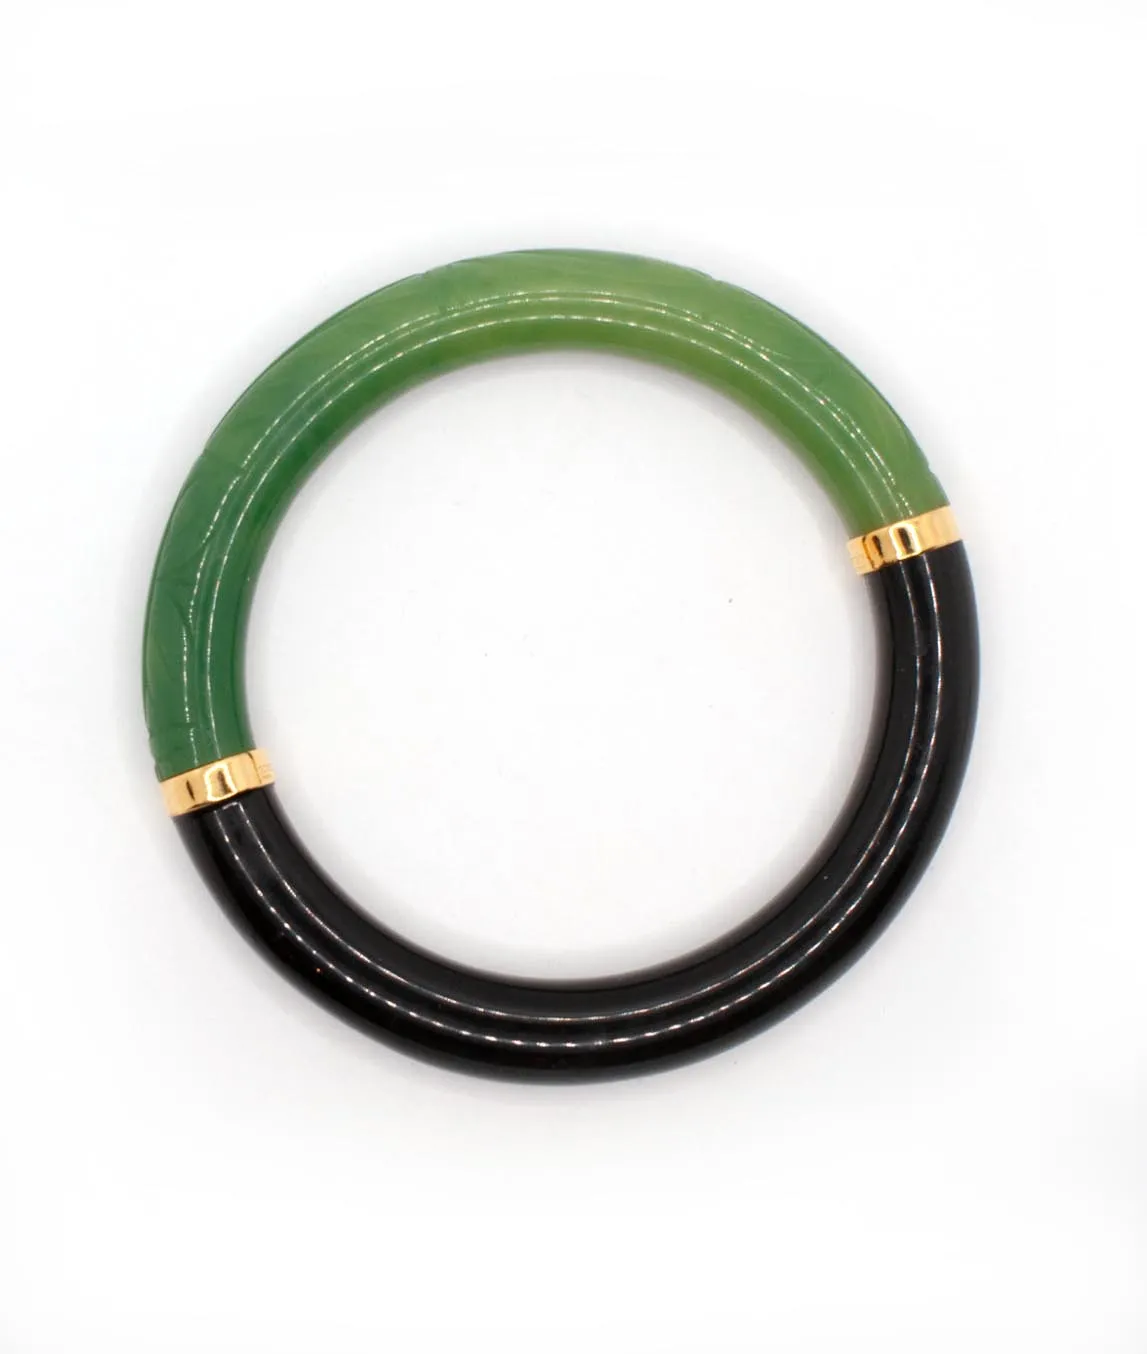 Vintage Givenchy green and black bangle with gold joins 